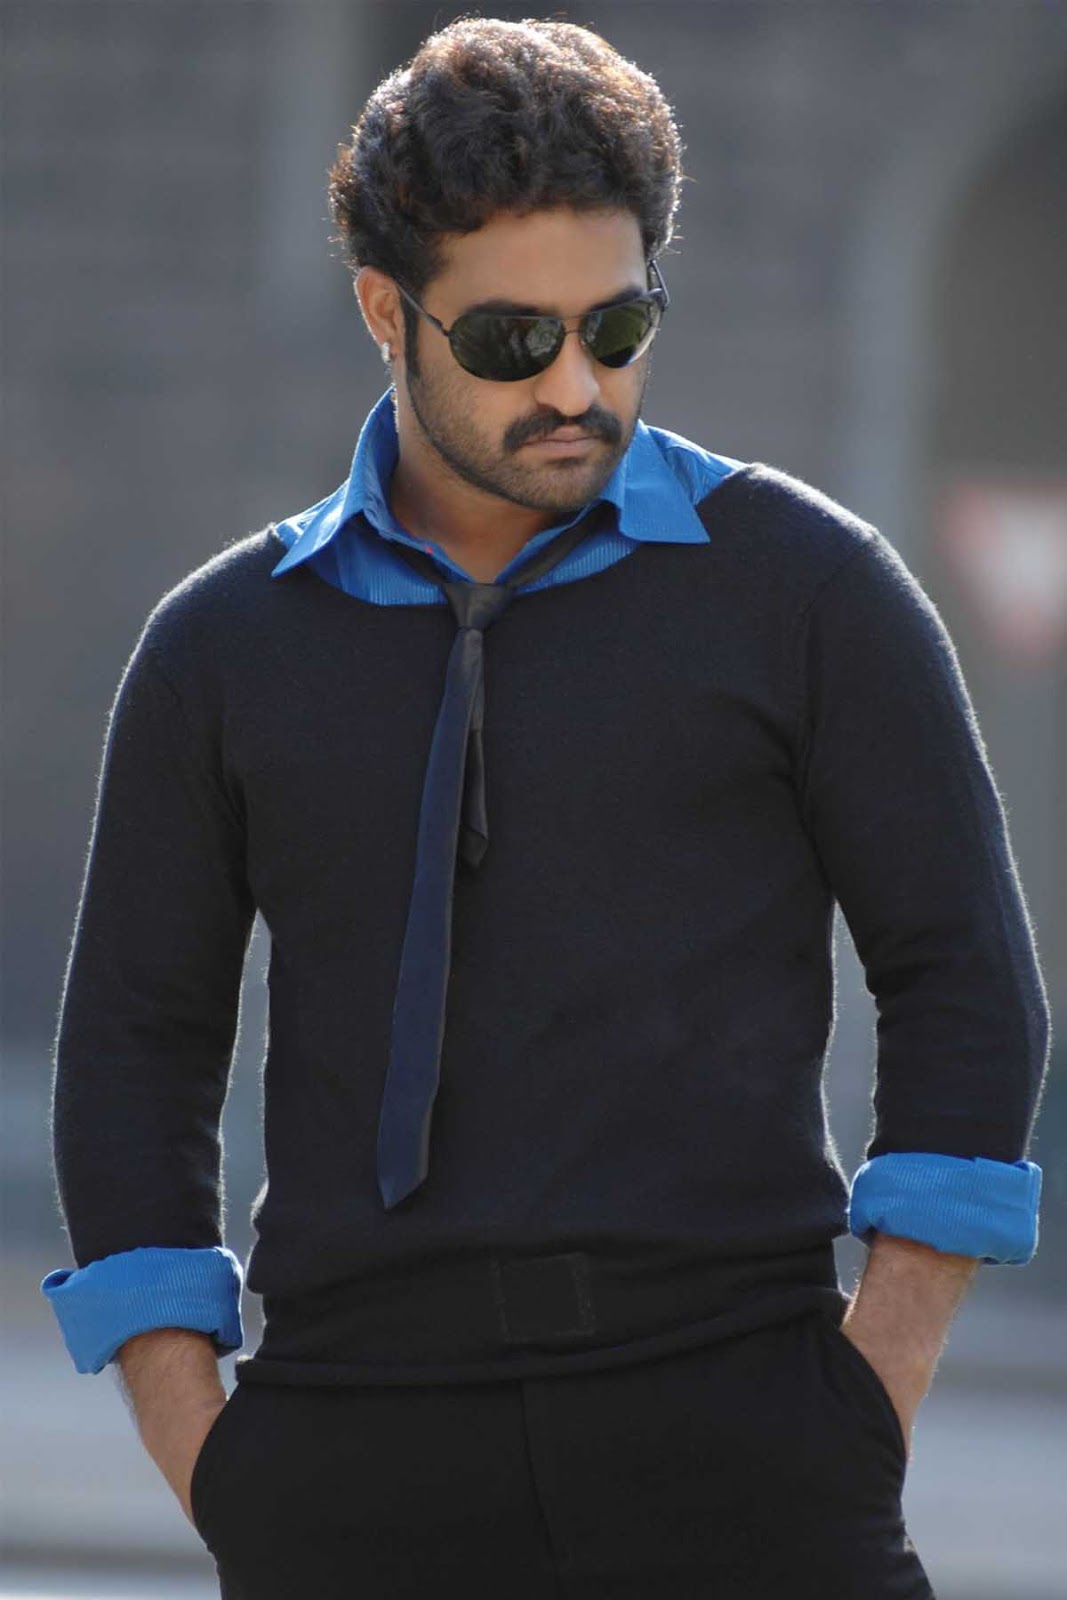 jr ntr hd wallpapers free download,clothing,sleeve,outerwear,cool,neck